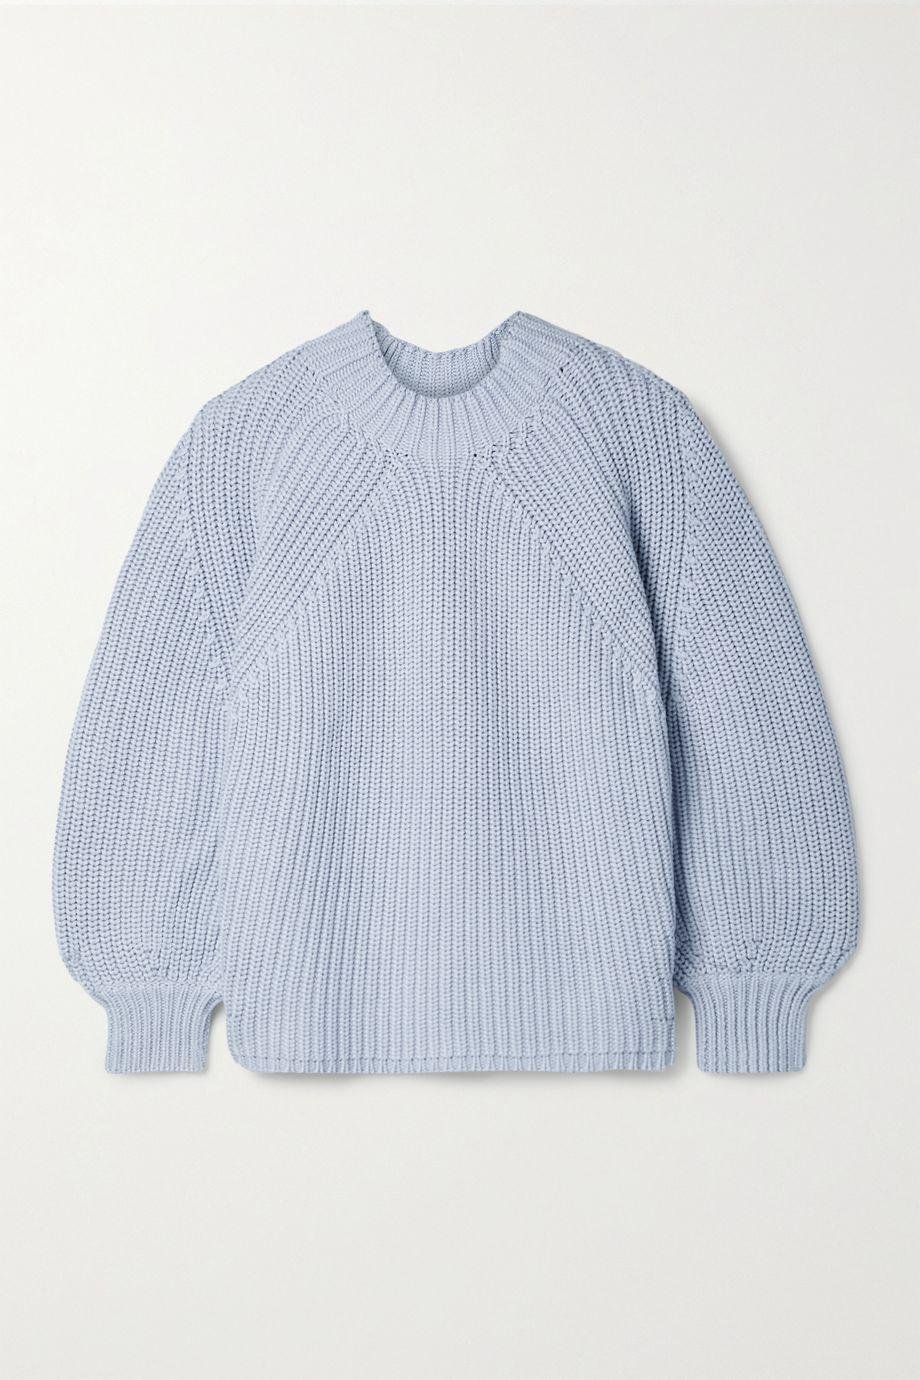 Nueva Merel ribbed cotton and cashmere-blend sweater by APIECE APART